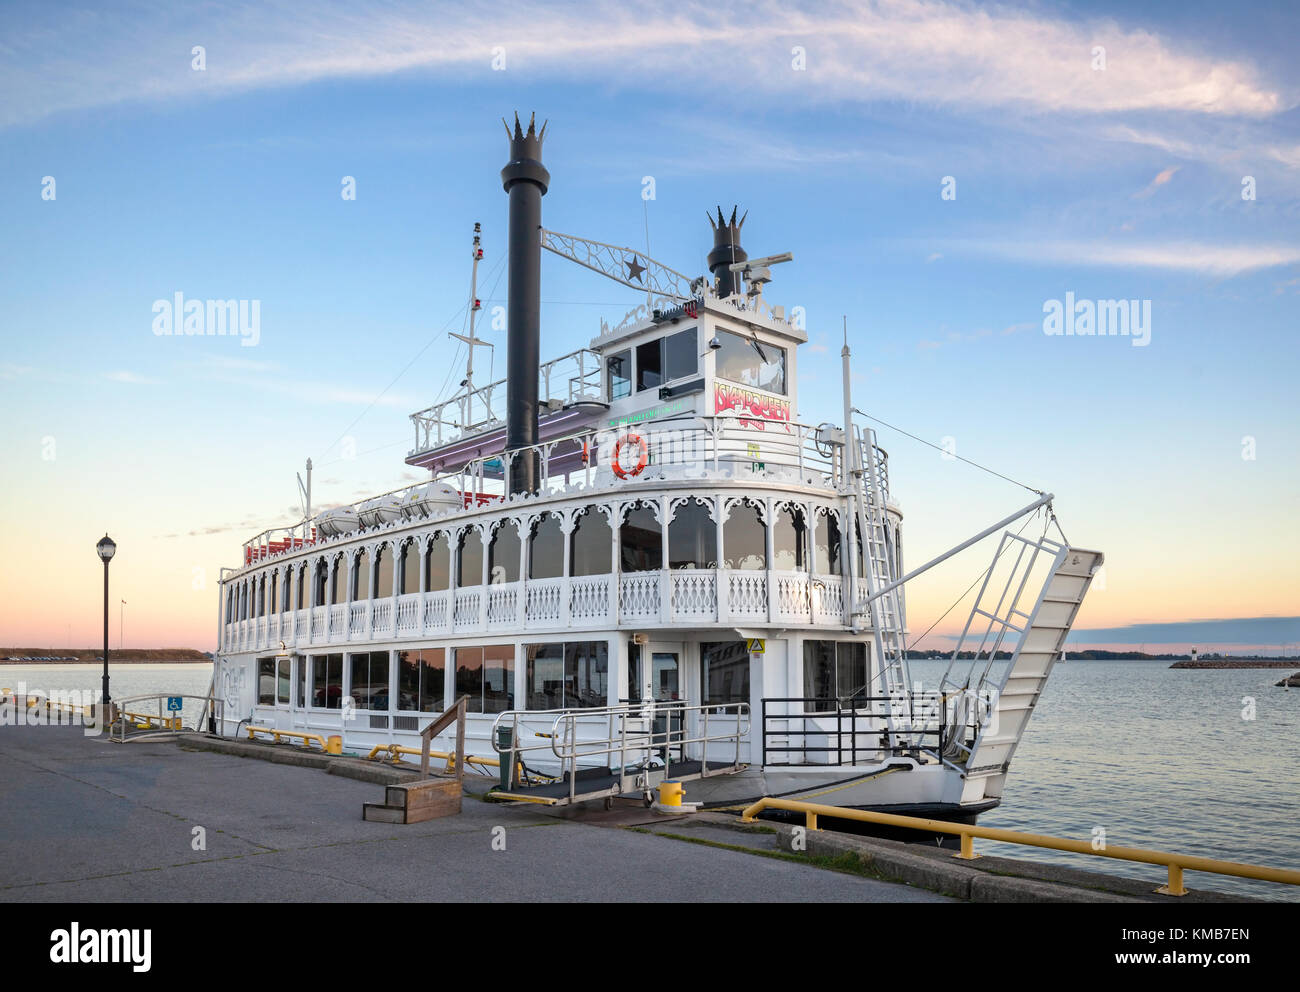 The Island Queen III is a cruise ship built in the Mississippi River boat style and docked at Crawford Wharf in the Confederation Basin. Stock Photo